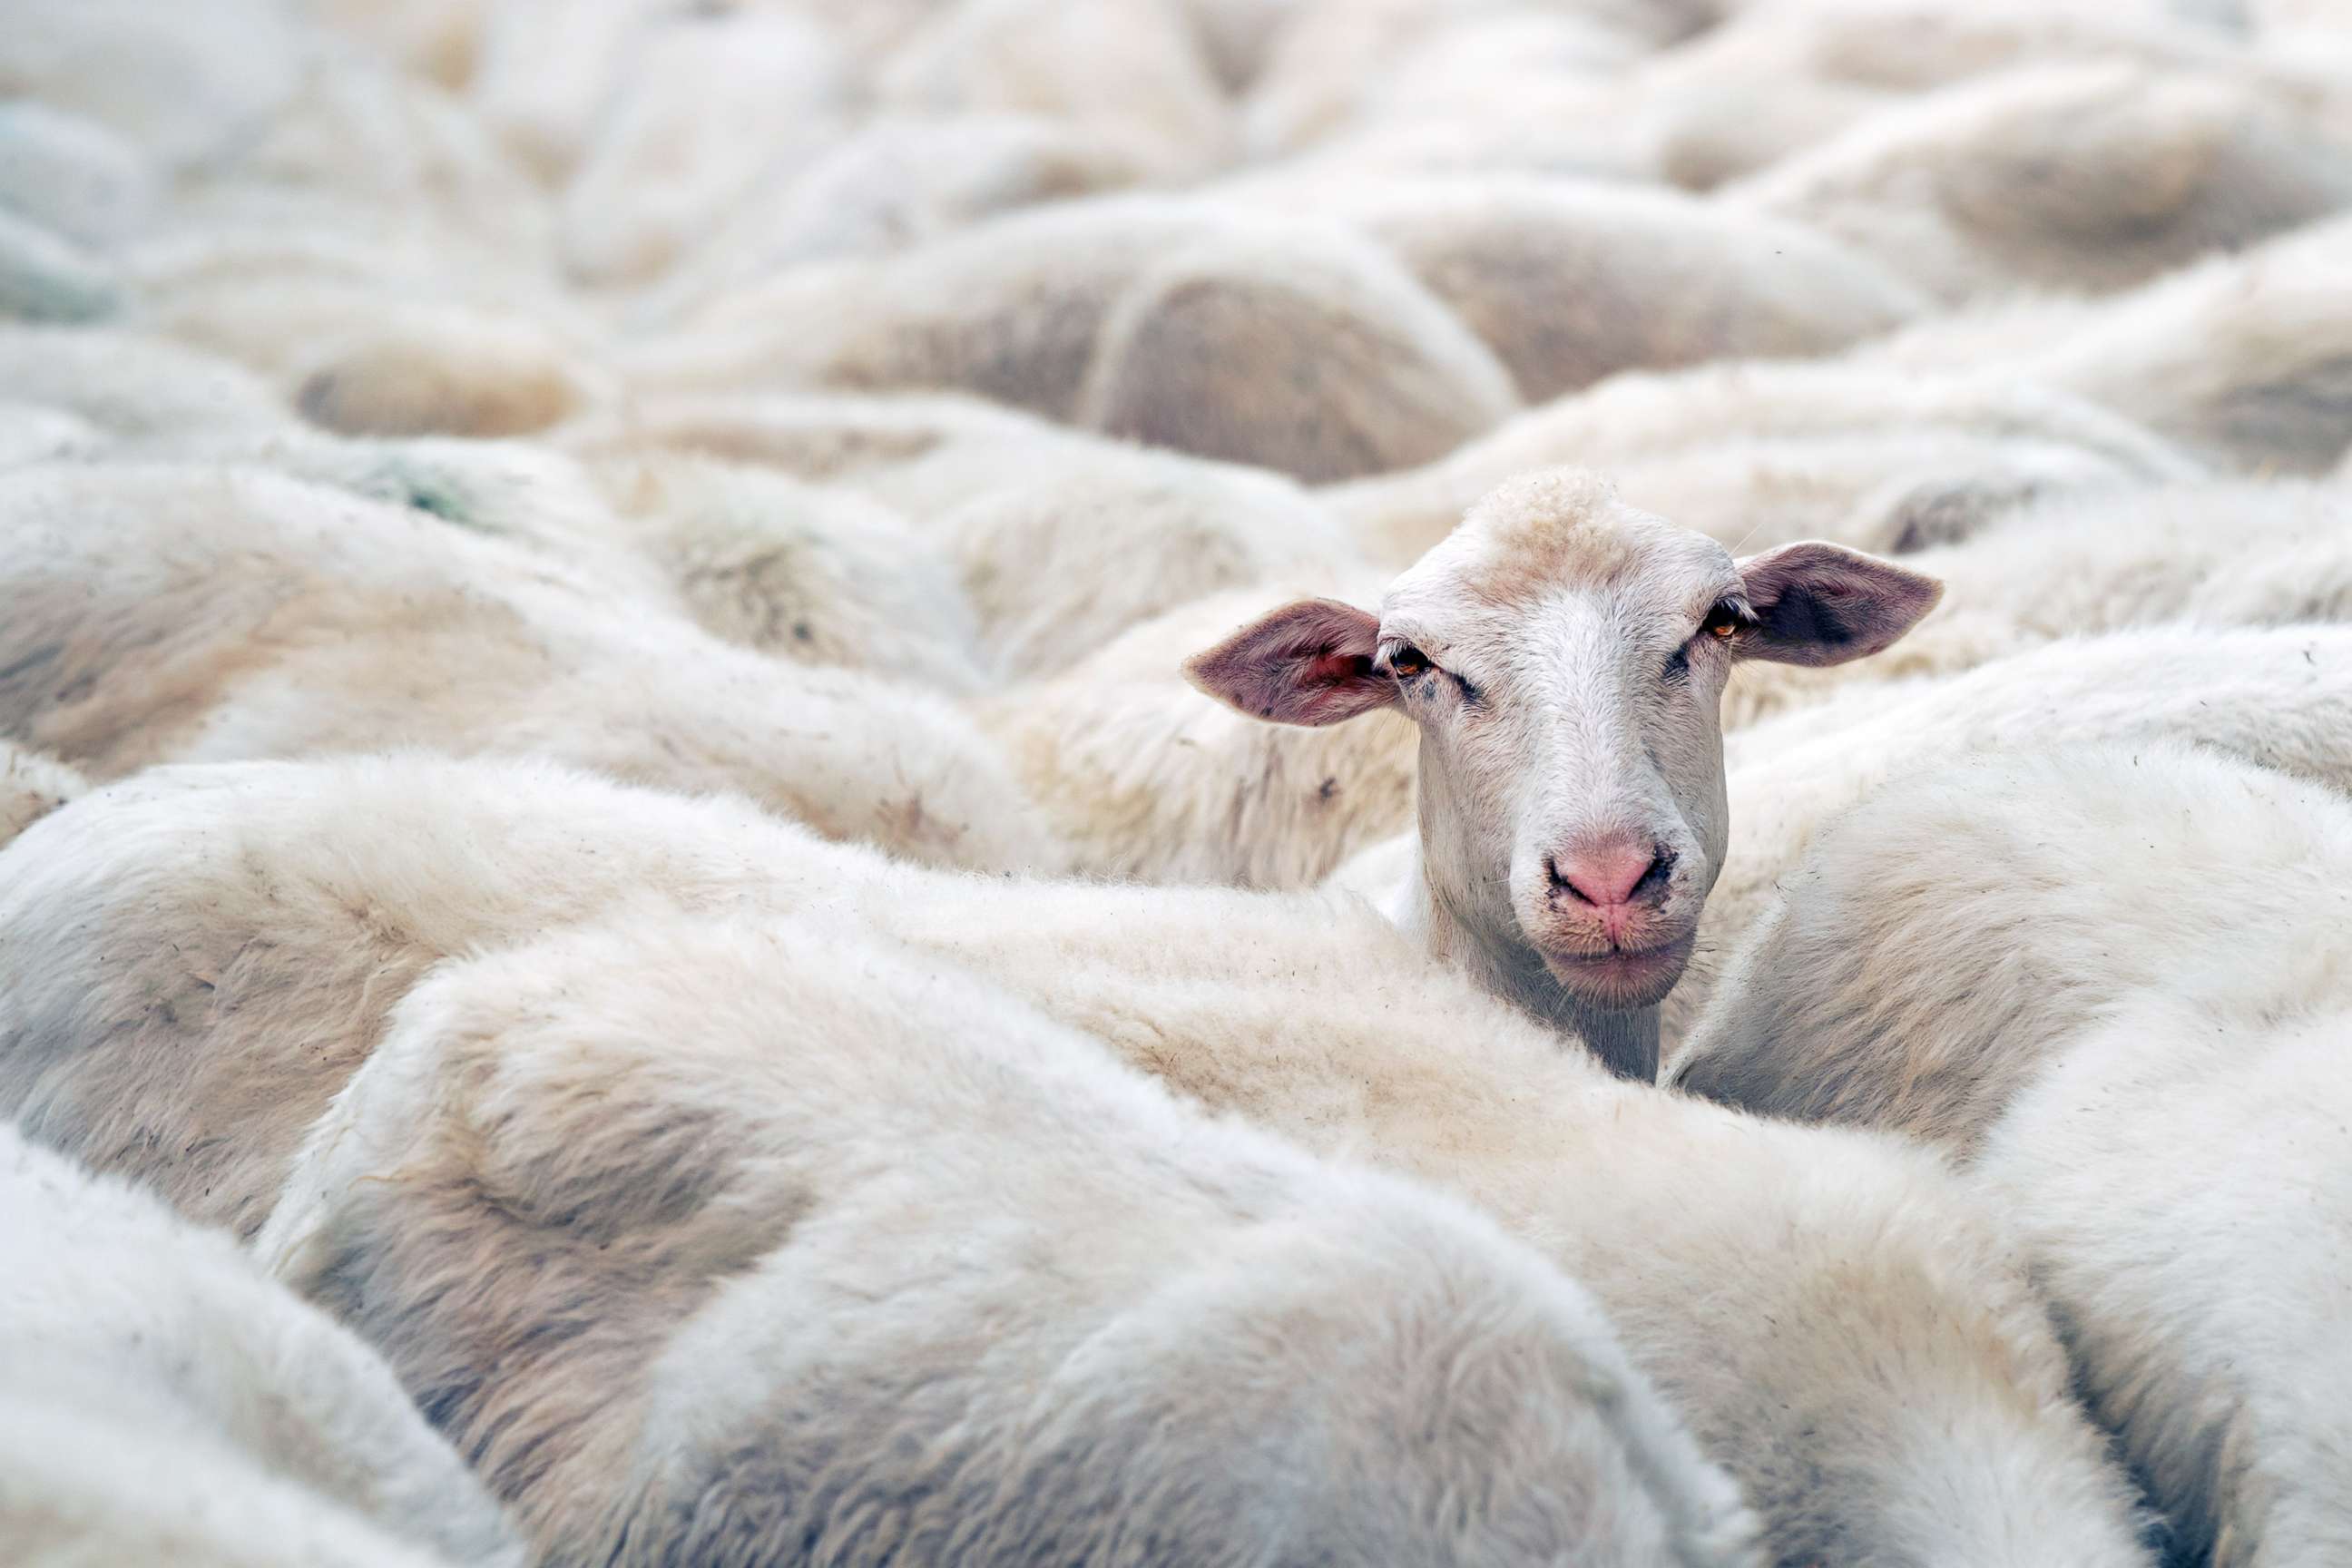 PHOTO: A sheep is seen in this stock photo.